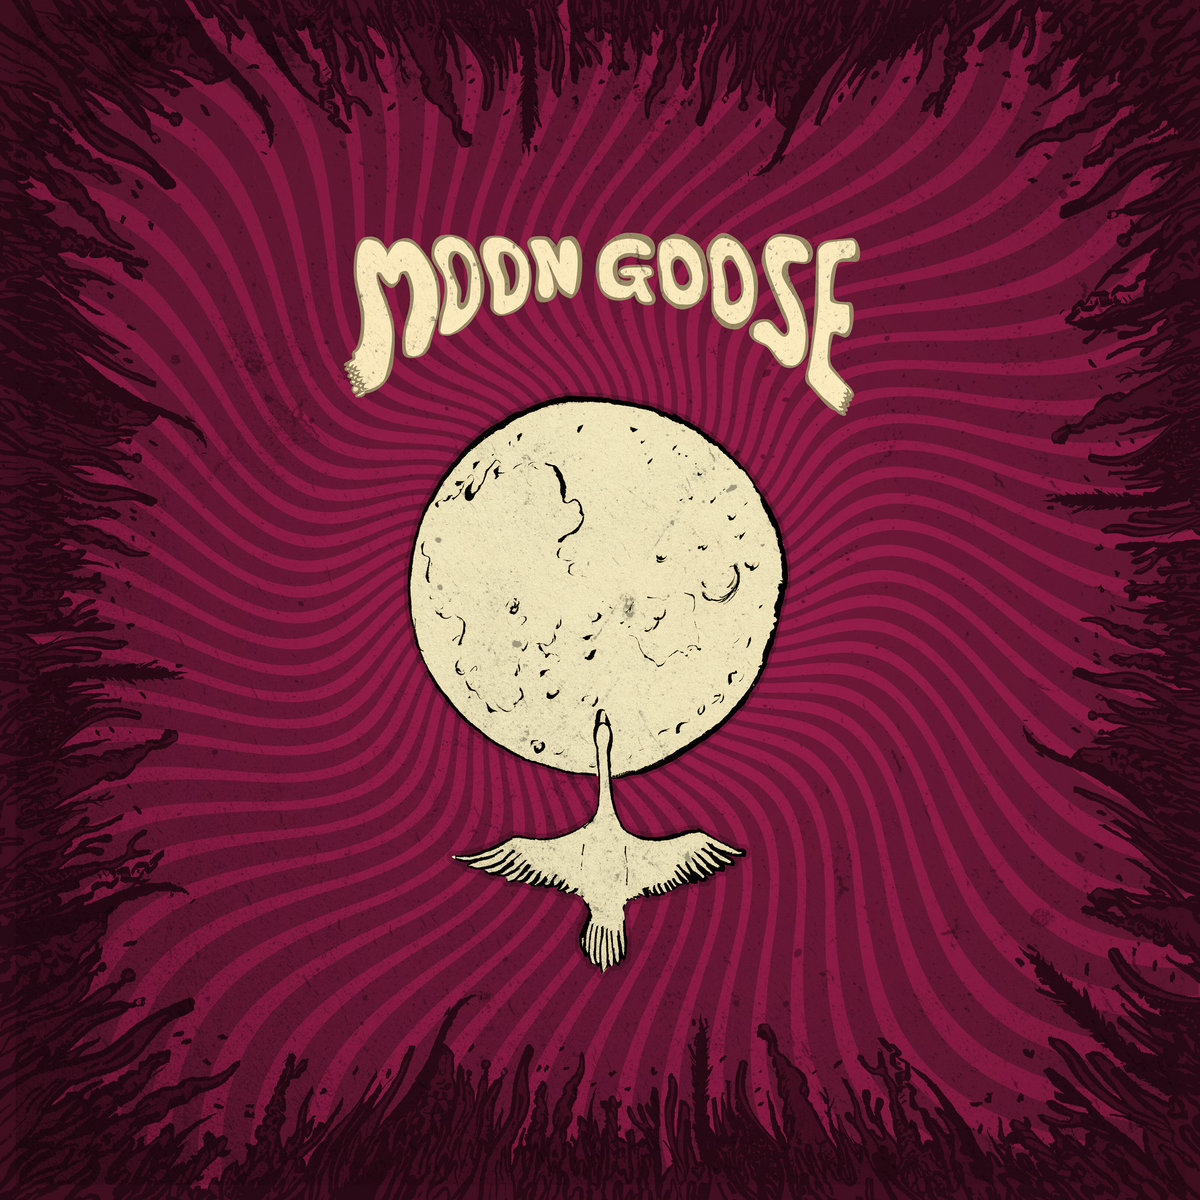 Moon Goose Live EP 2018 review